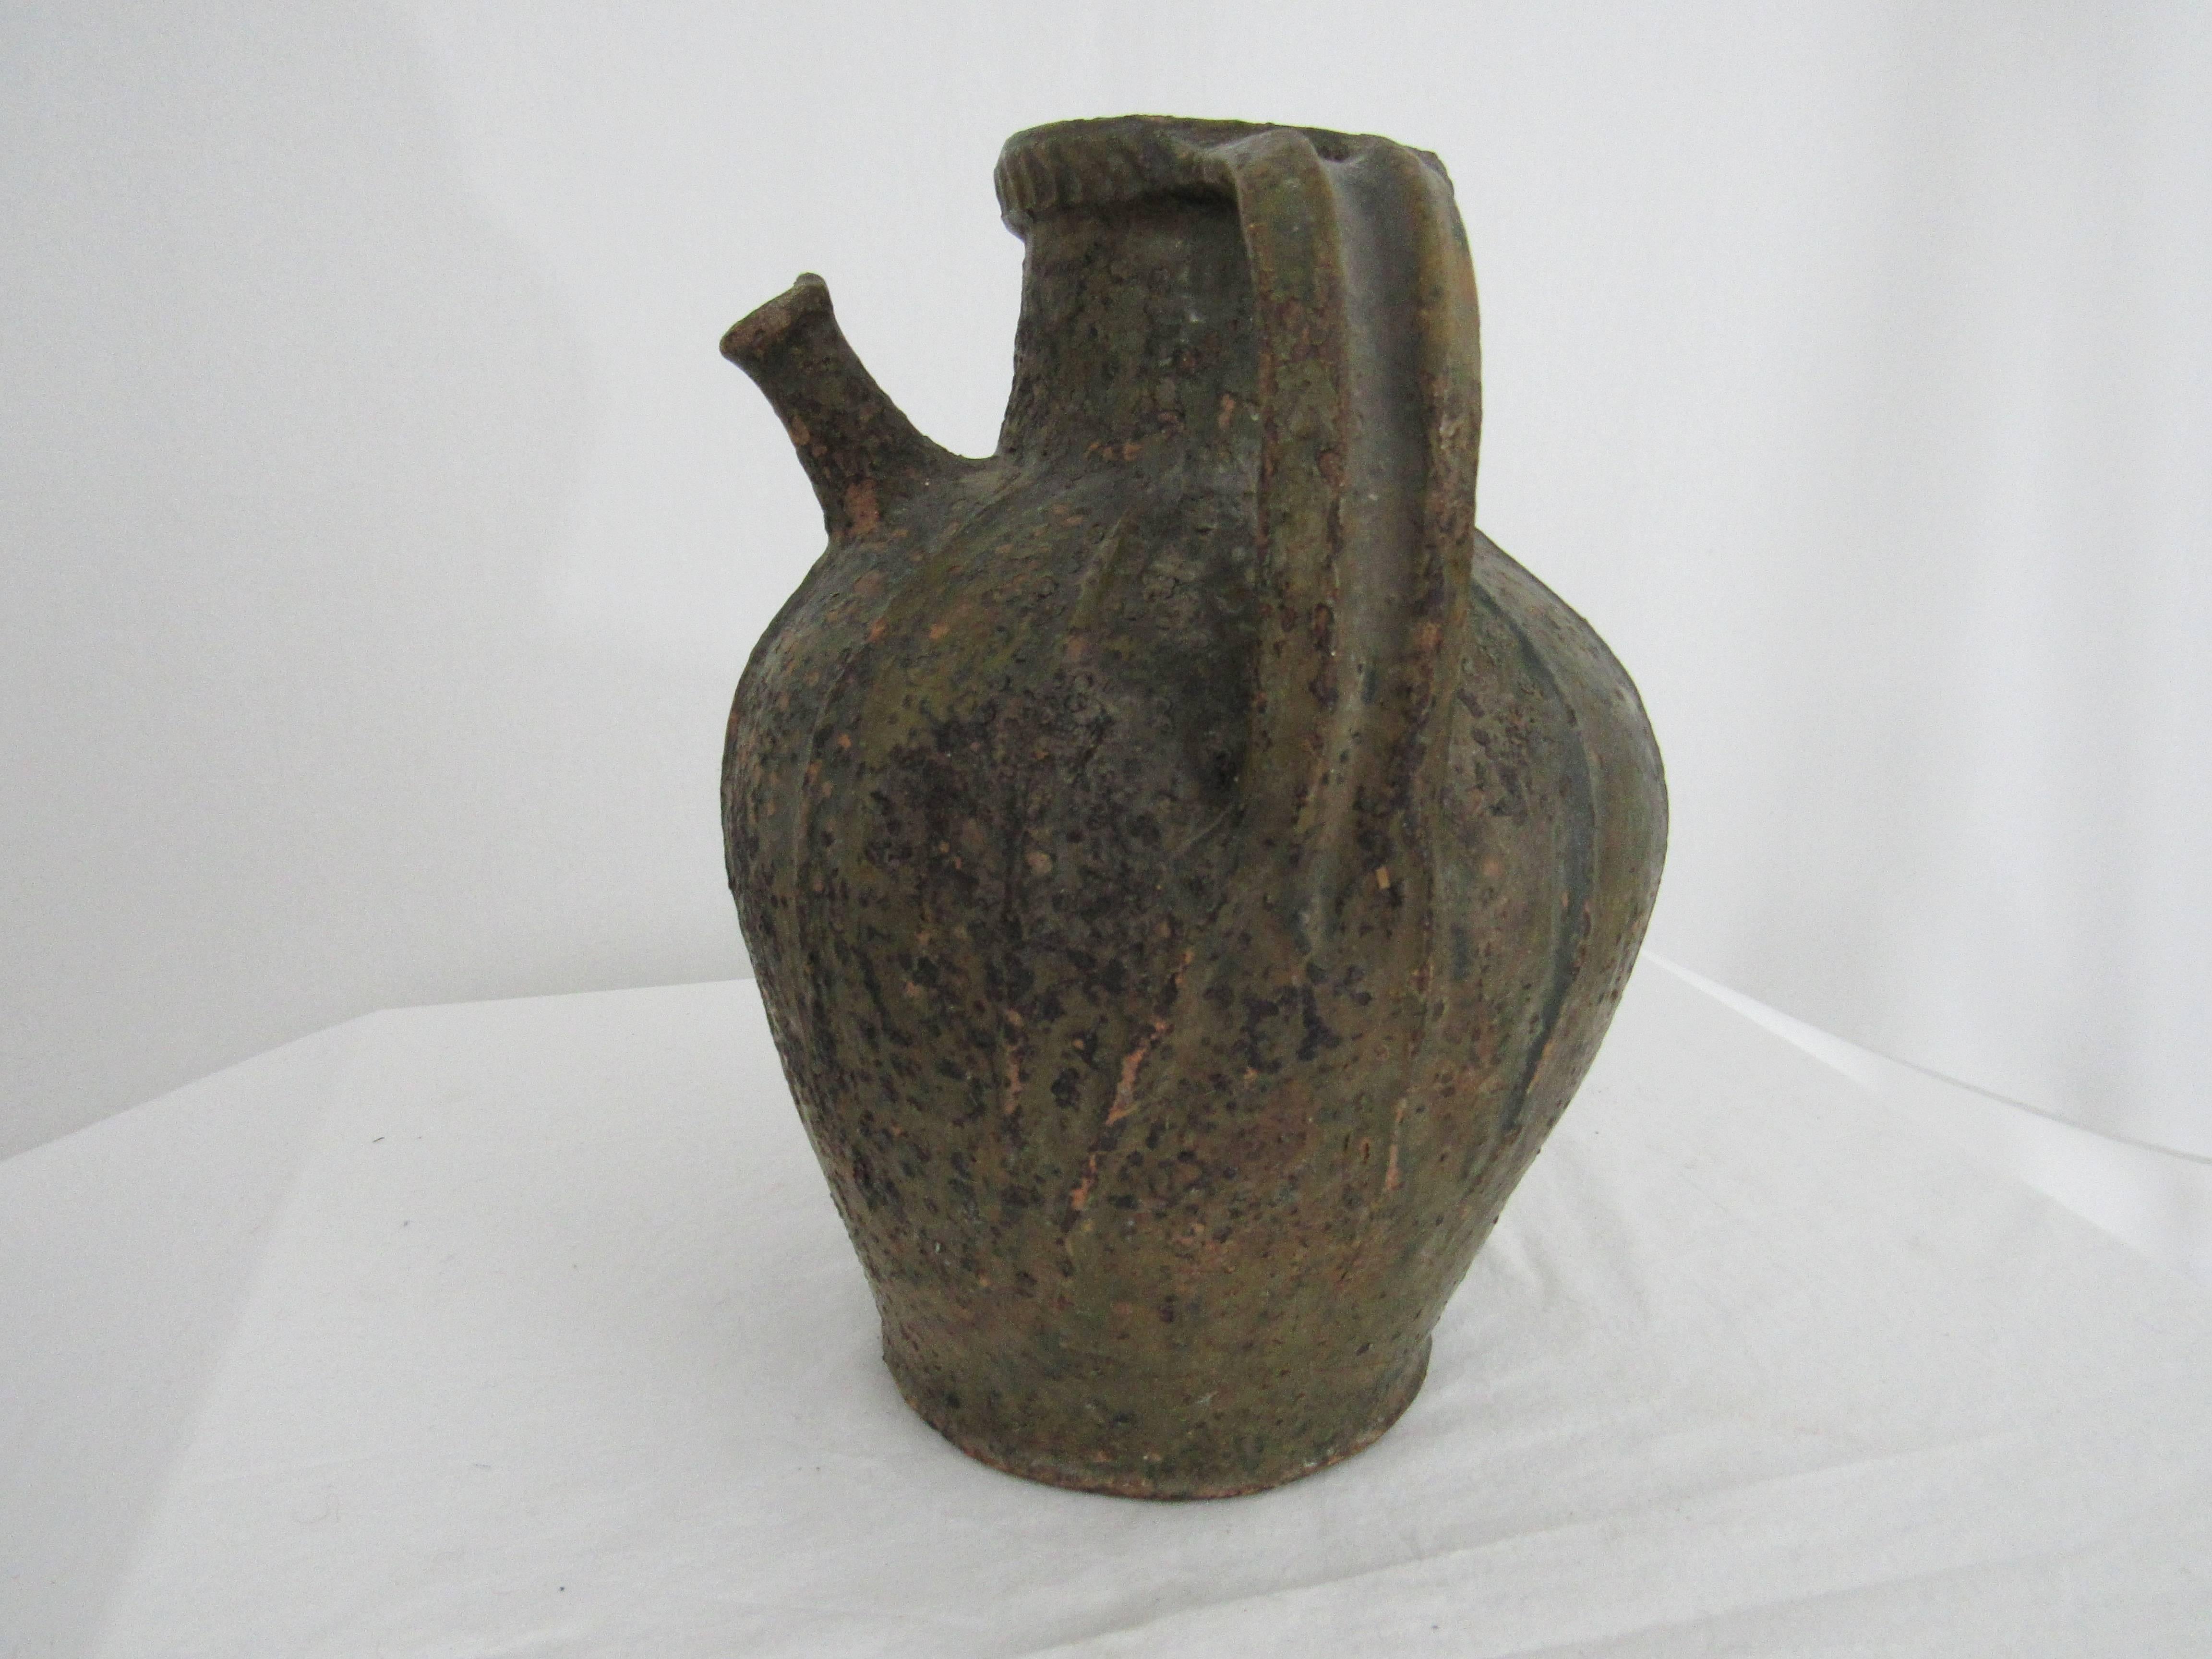 French oil jar from Auvergne region in France. A two-handled green-glazed terracotta storage vessel, with pouring spout. It has a wonderful textured surface as well as a spattering of dried olive oil left on the surface as an artifact of years of